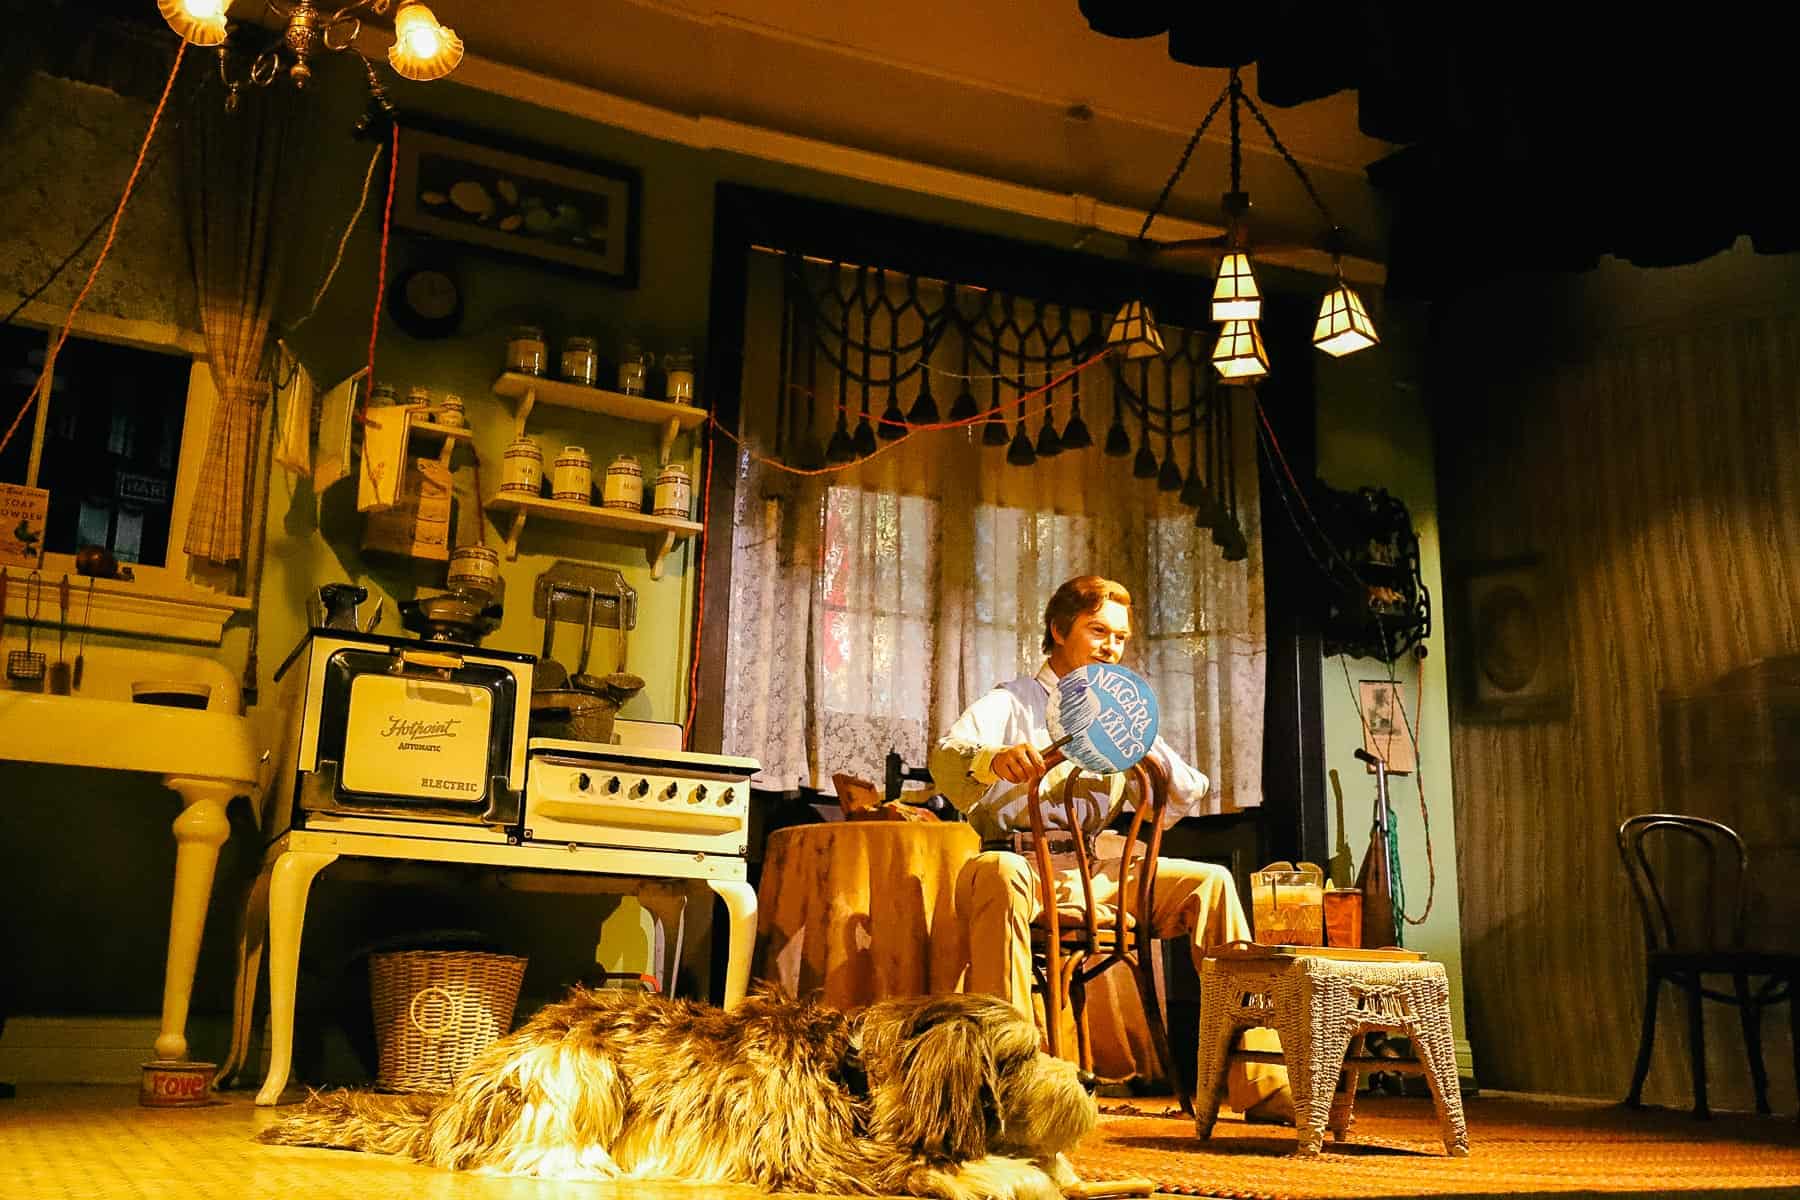 John talks to Rover and the audience in Carousel of Progress. 